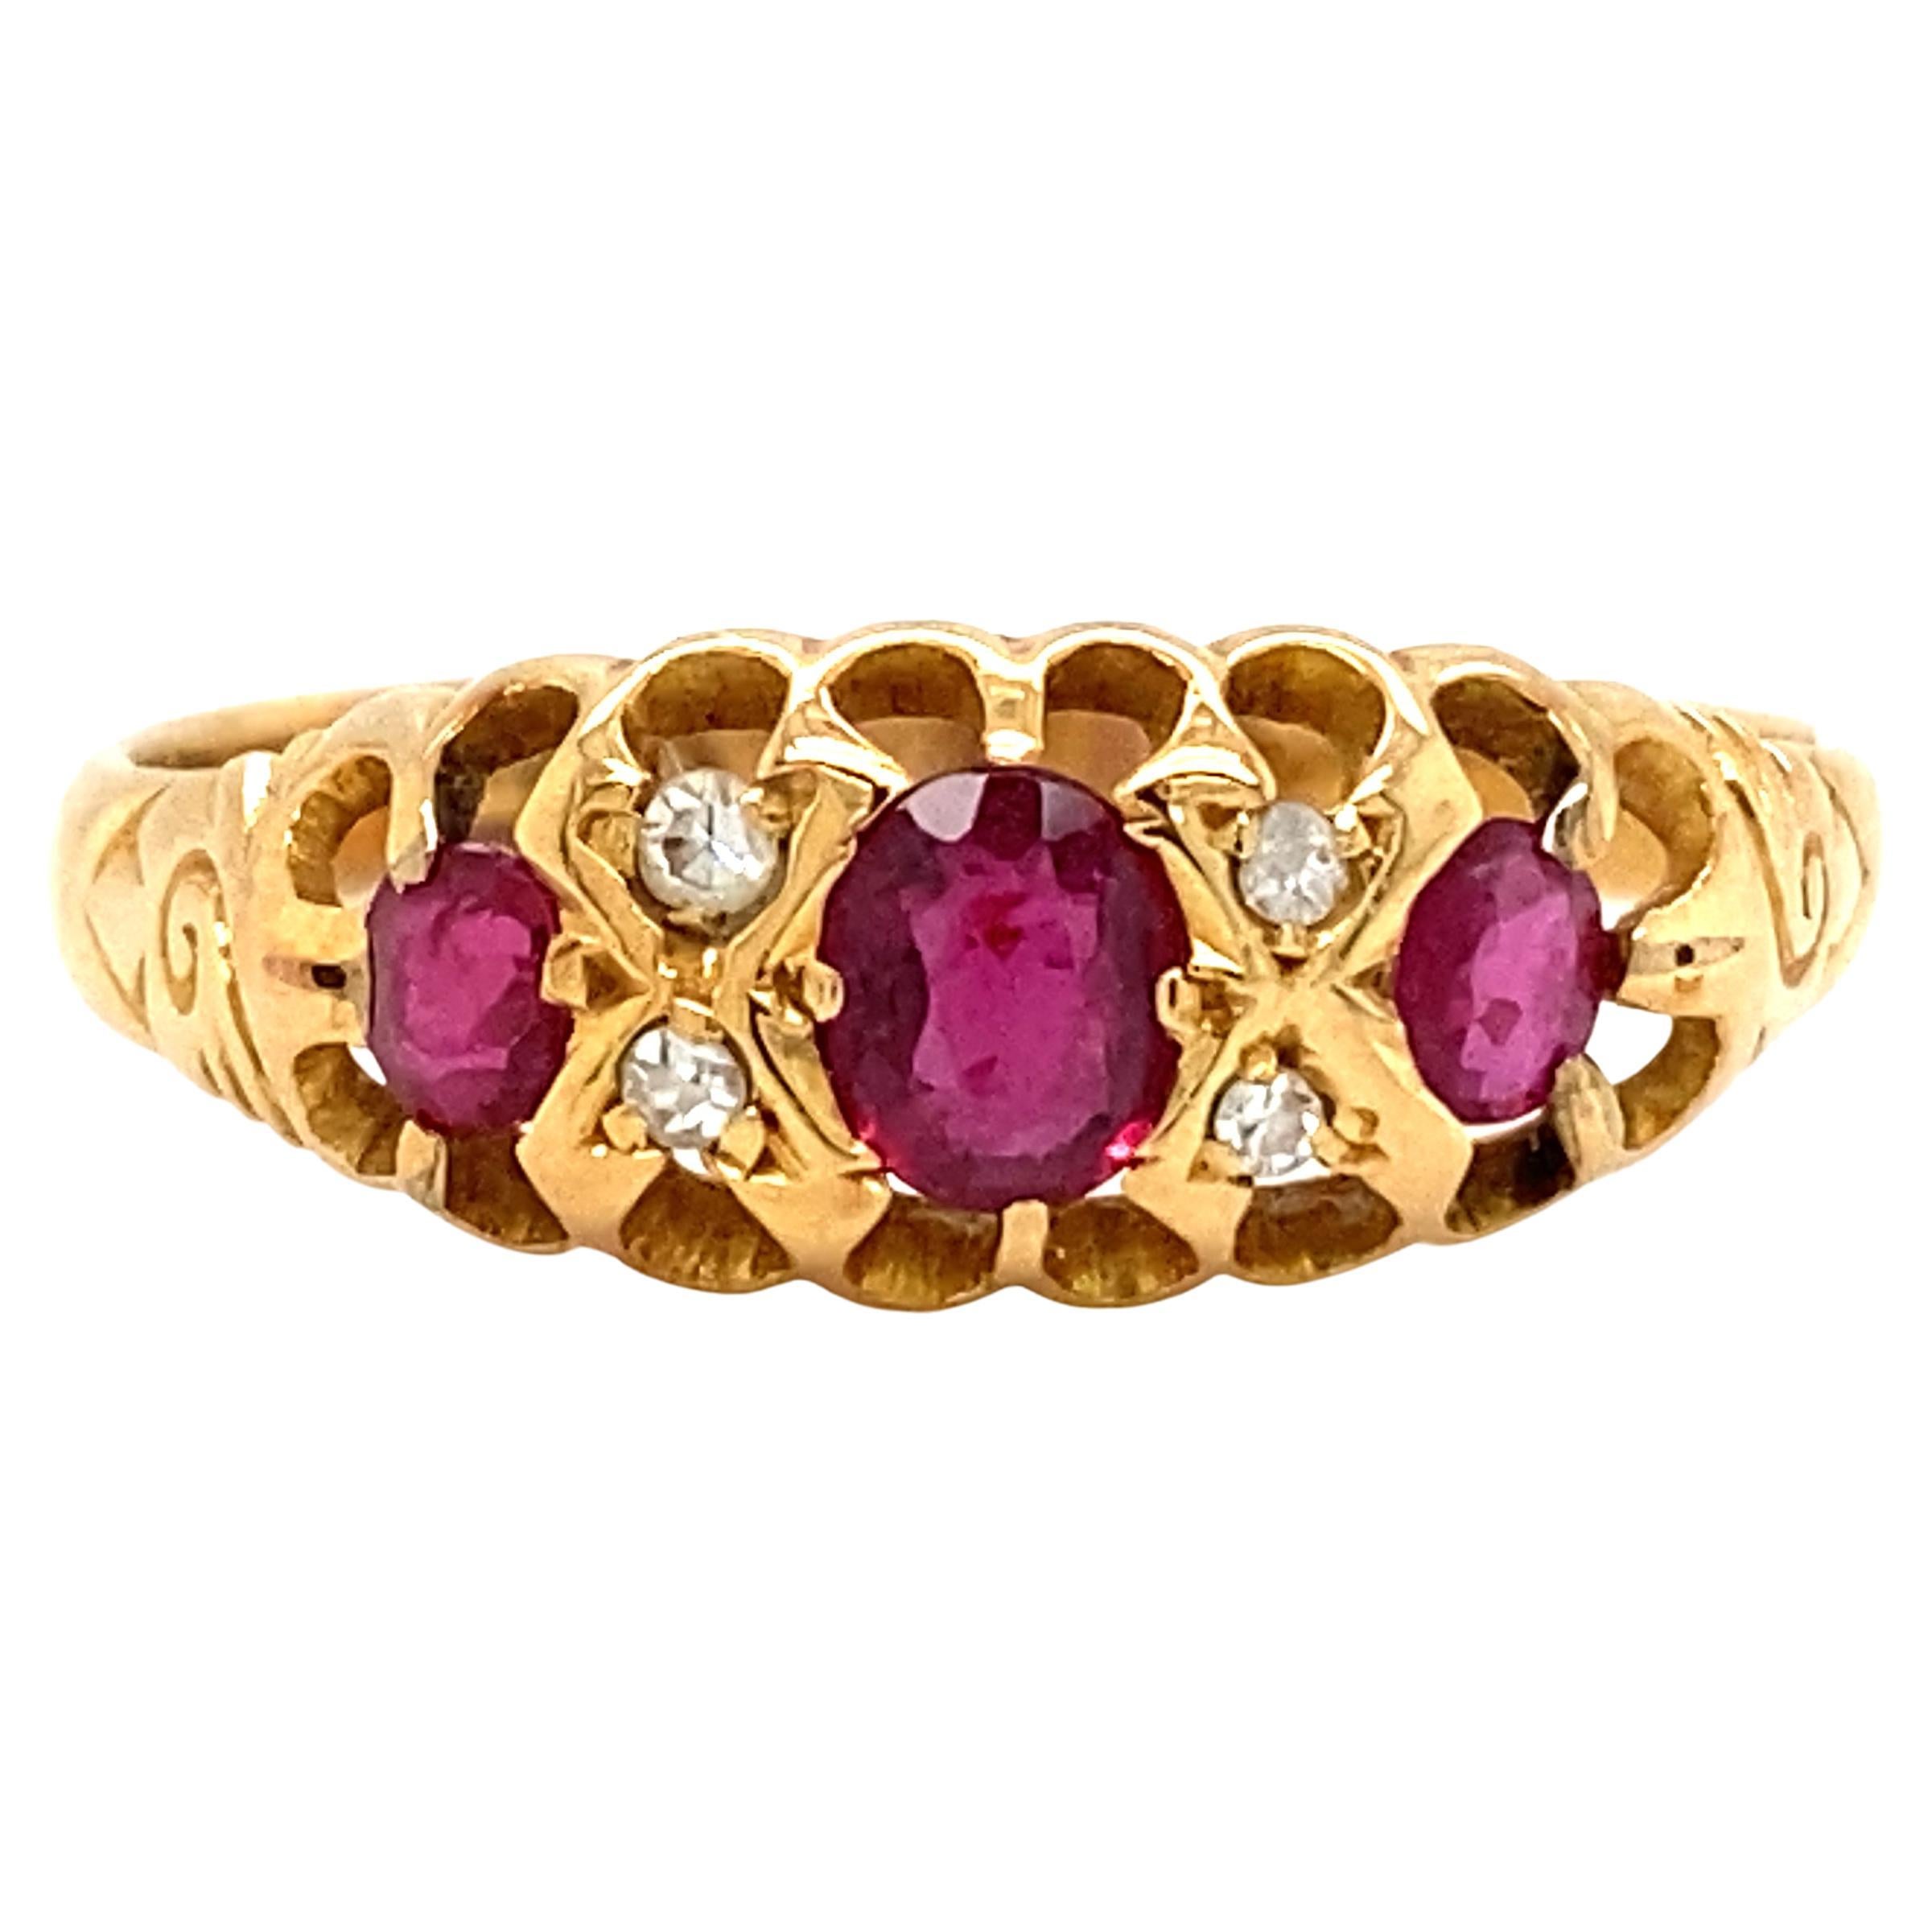 Circa 1910s Edwardian Oval Ruby and Diamond Ring in 14 Karat Yellow Gold For Sale